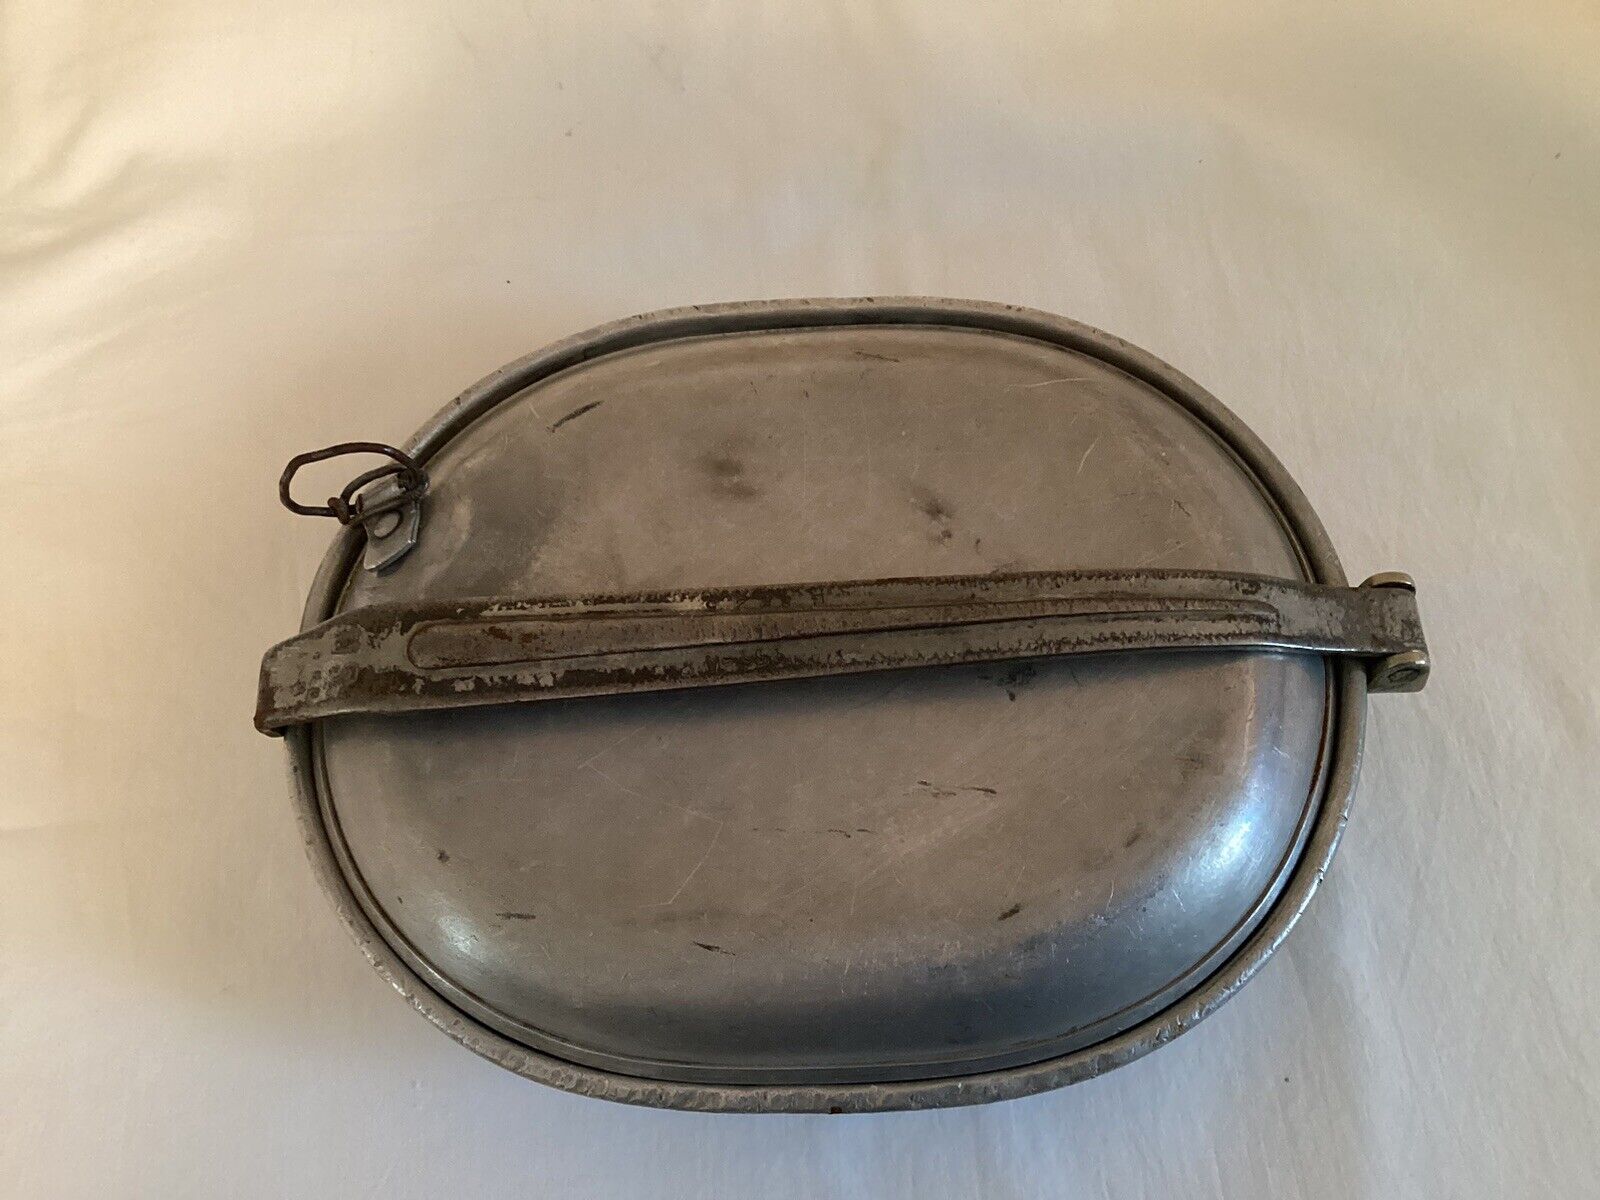 WW1  Mess Kit With Silver Ware Trench Engraved And ID Number On The Handle